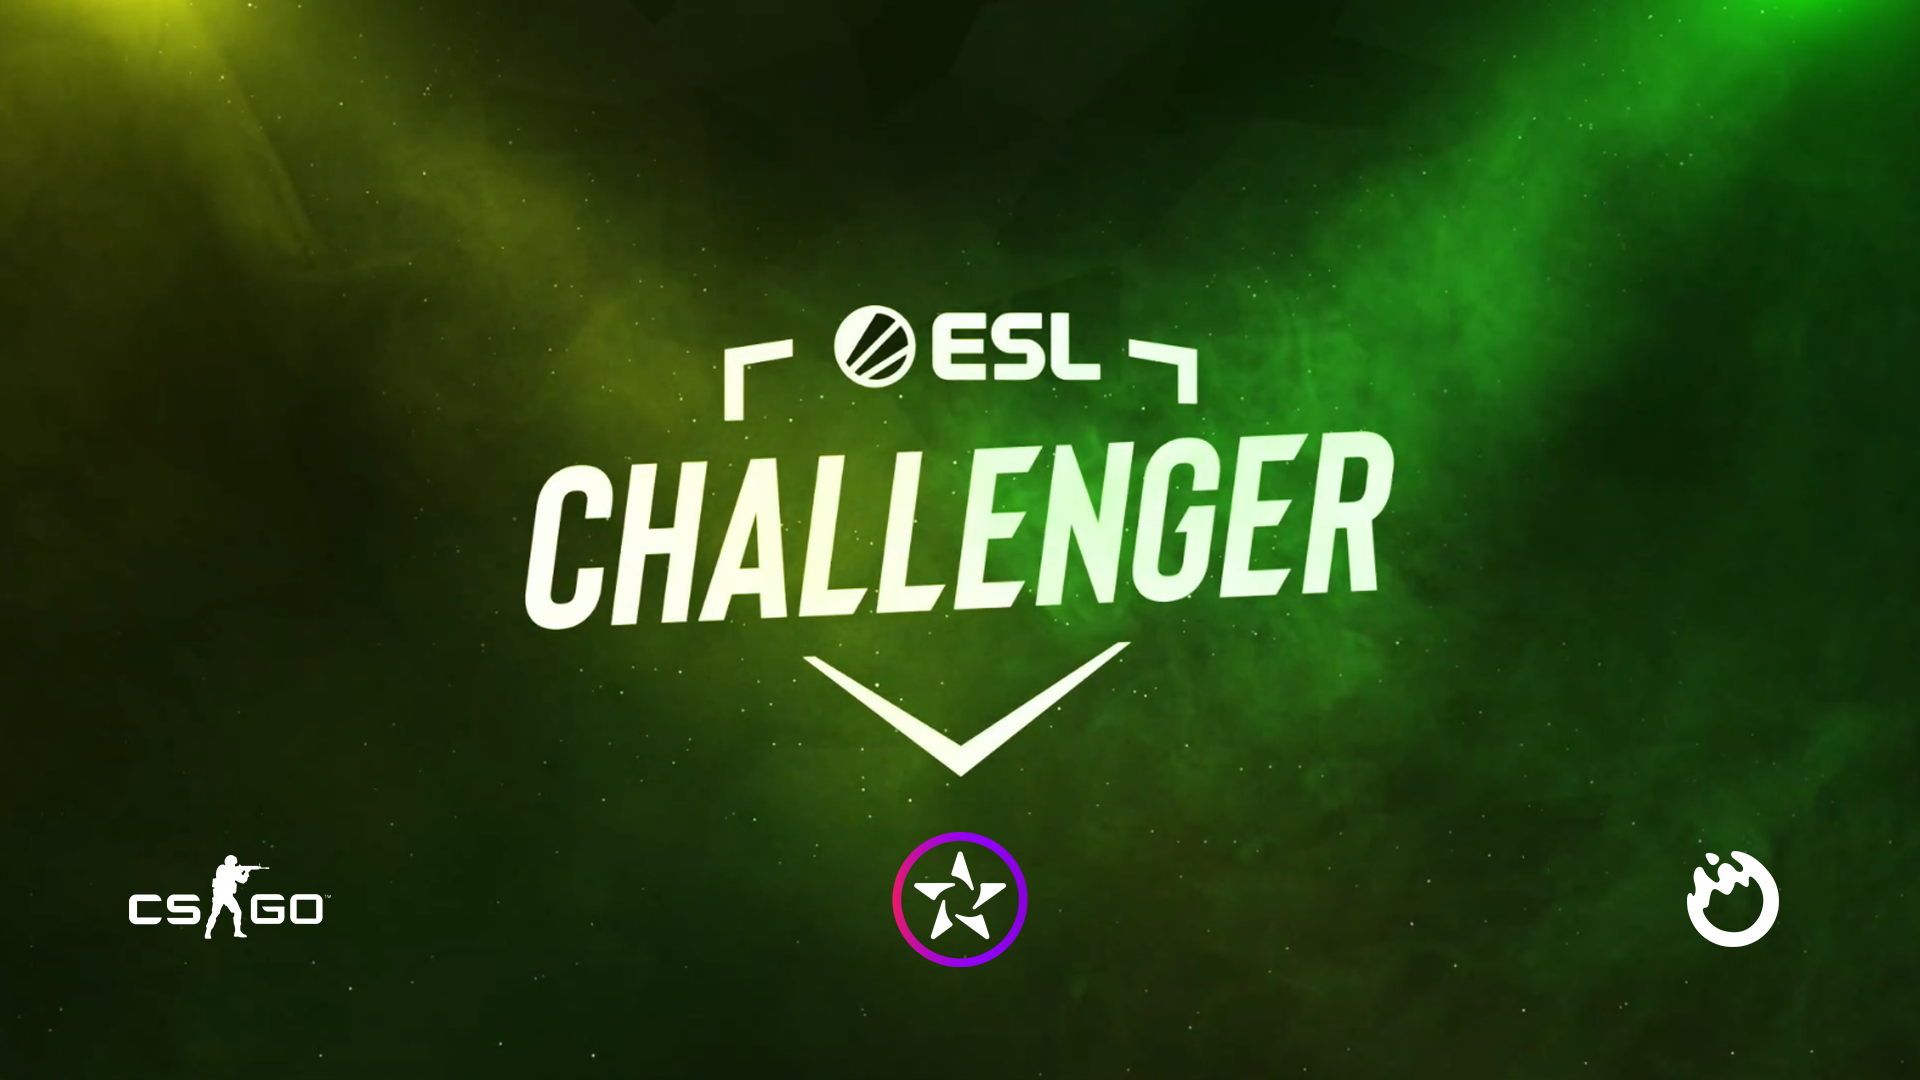 Order go winless at ESL Challenger 48 despite strong performance against Complexity